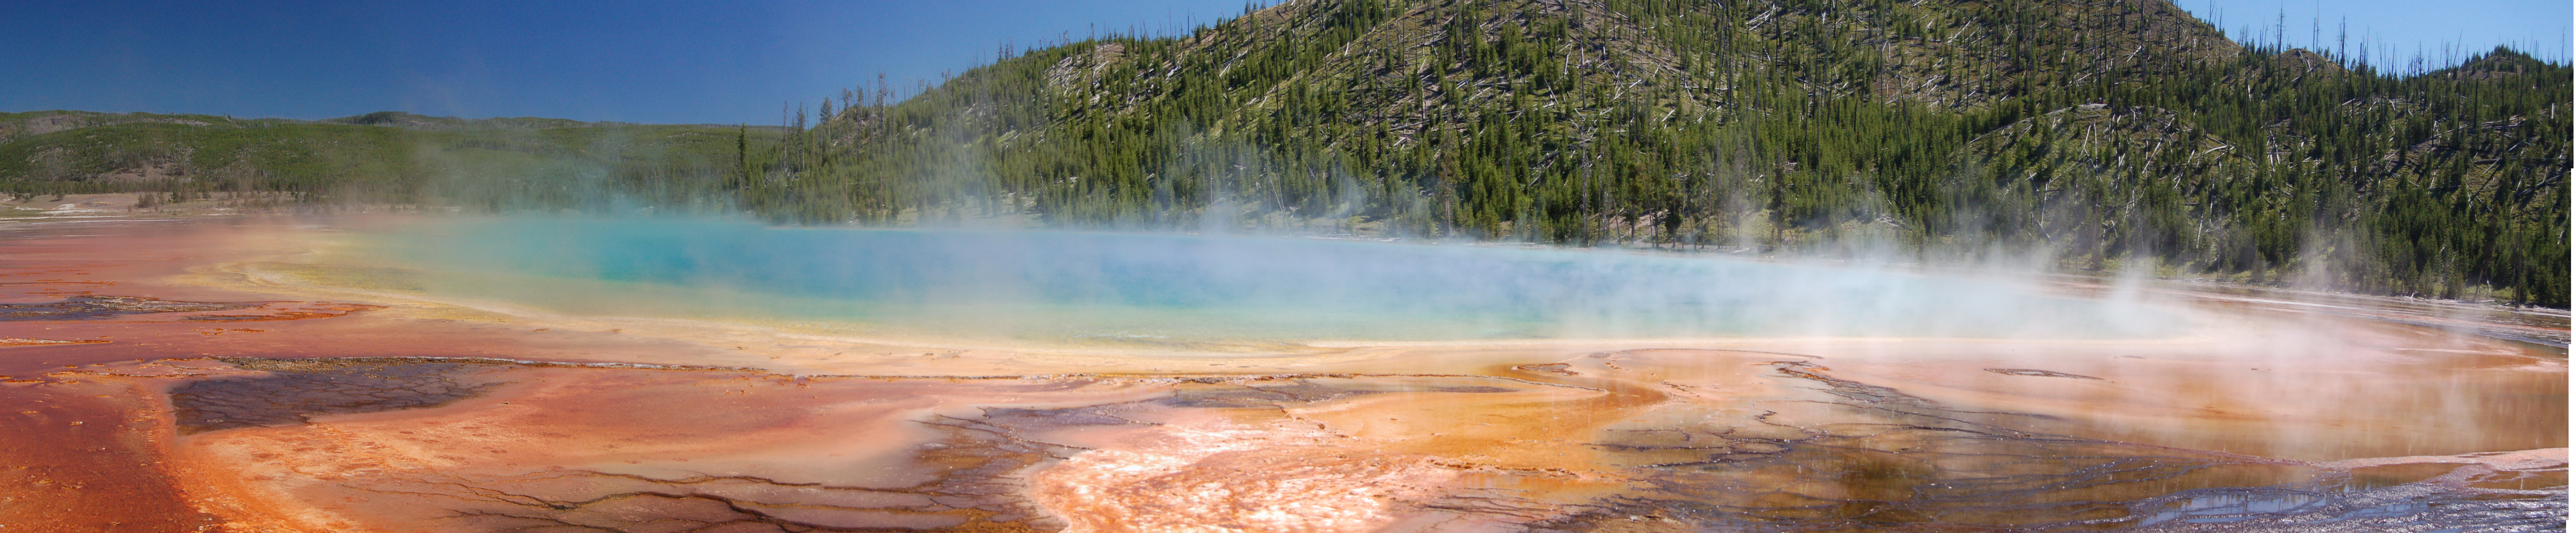 Mists at Grand Prismatic Spring